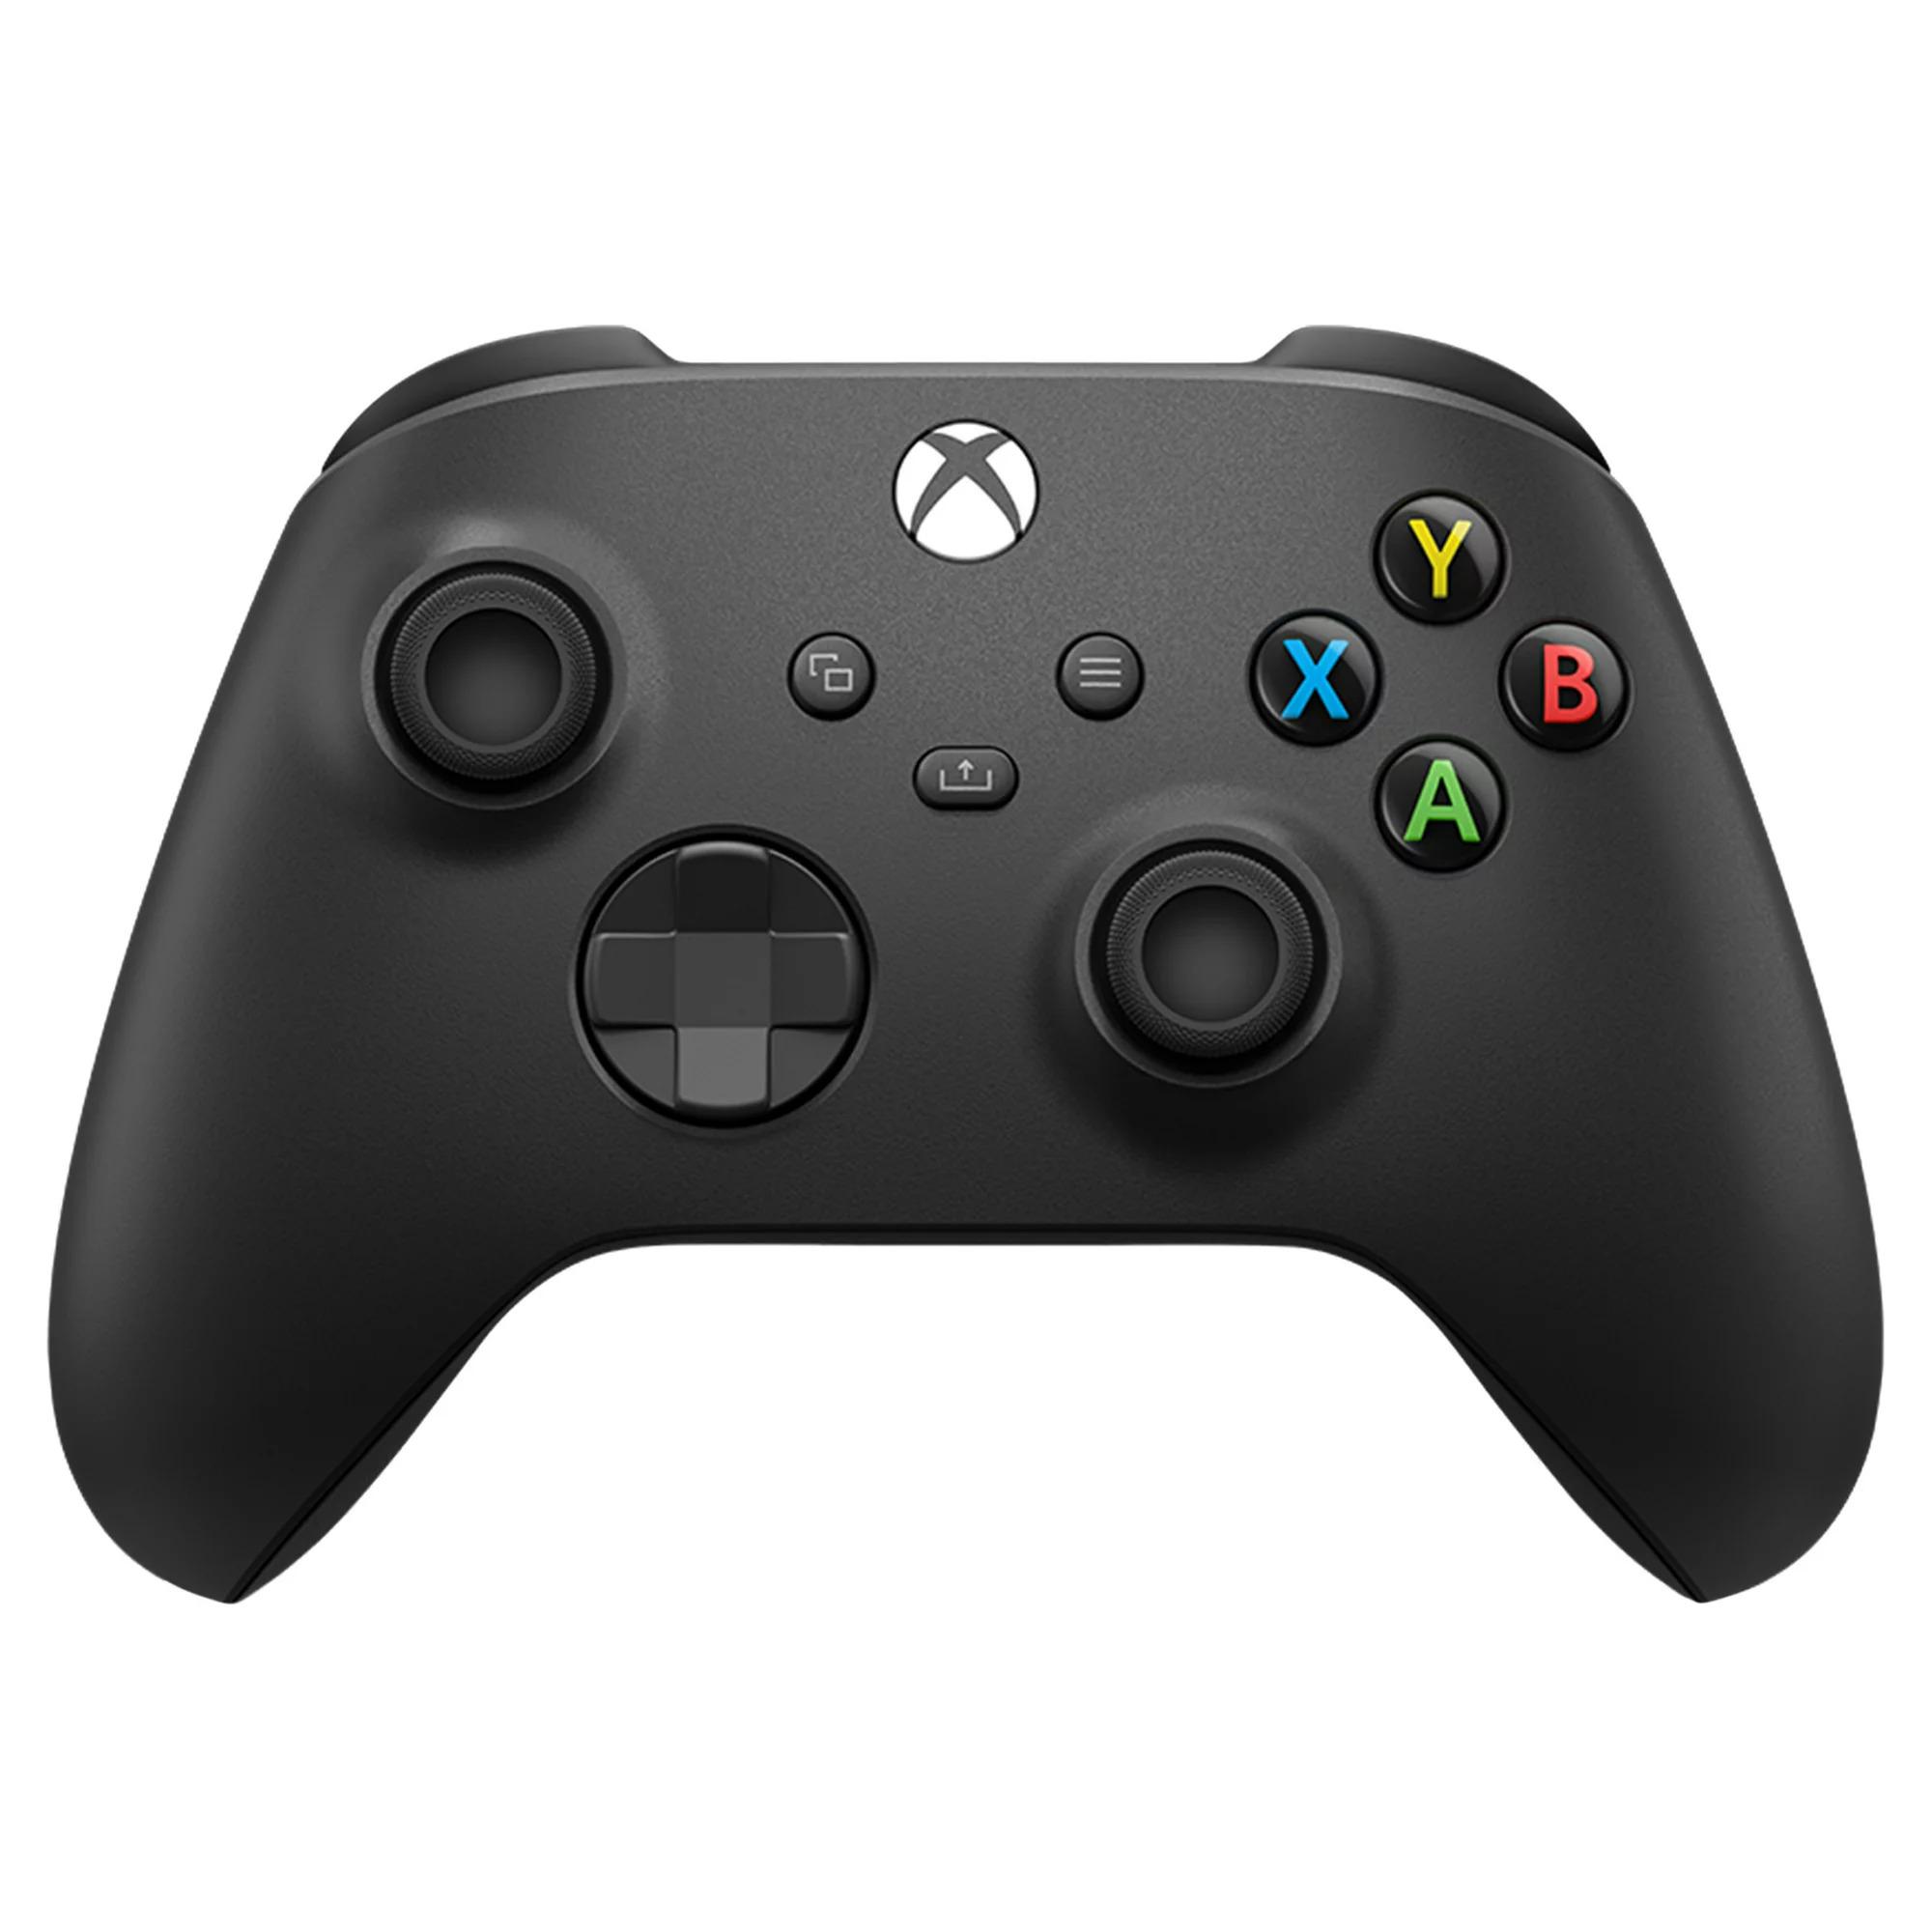 Microsoft Xbox Wireless Controller Black for $39 Shipped